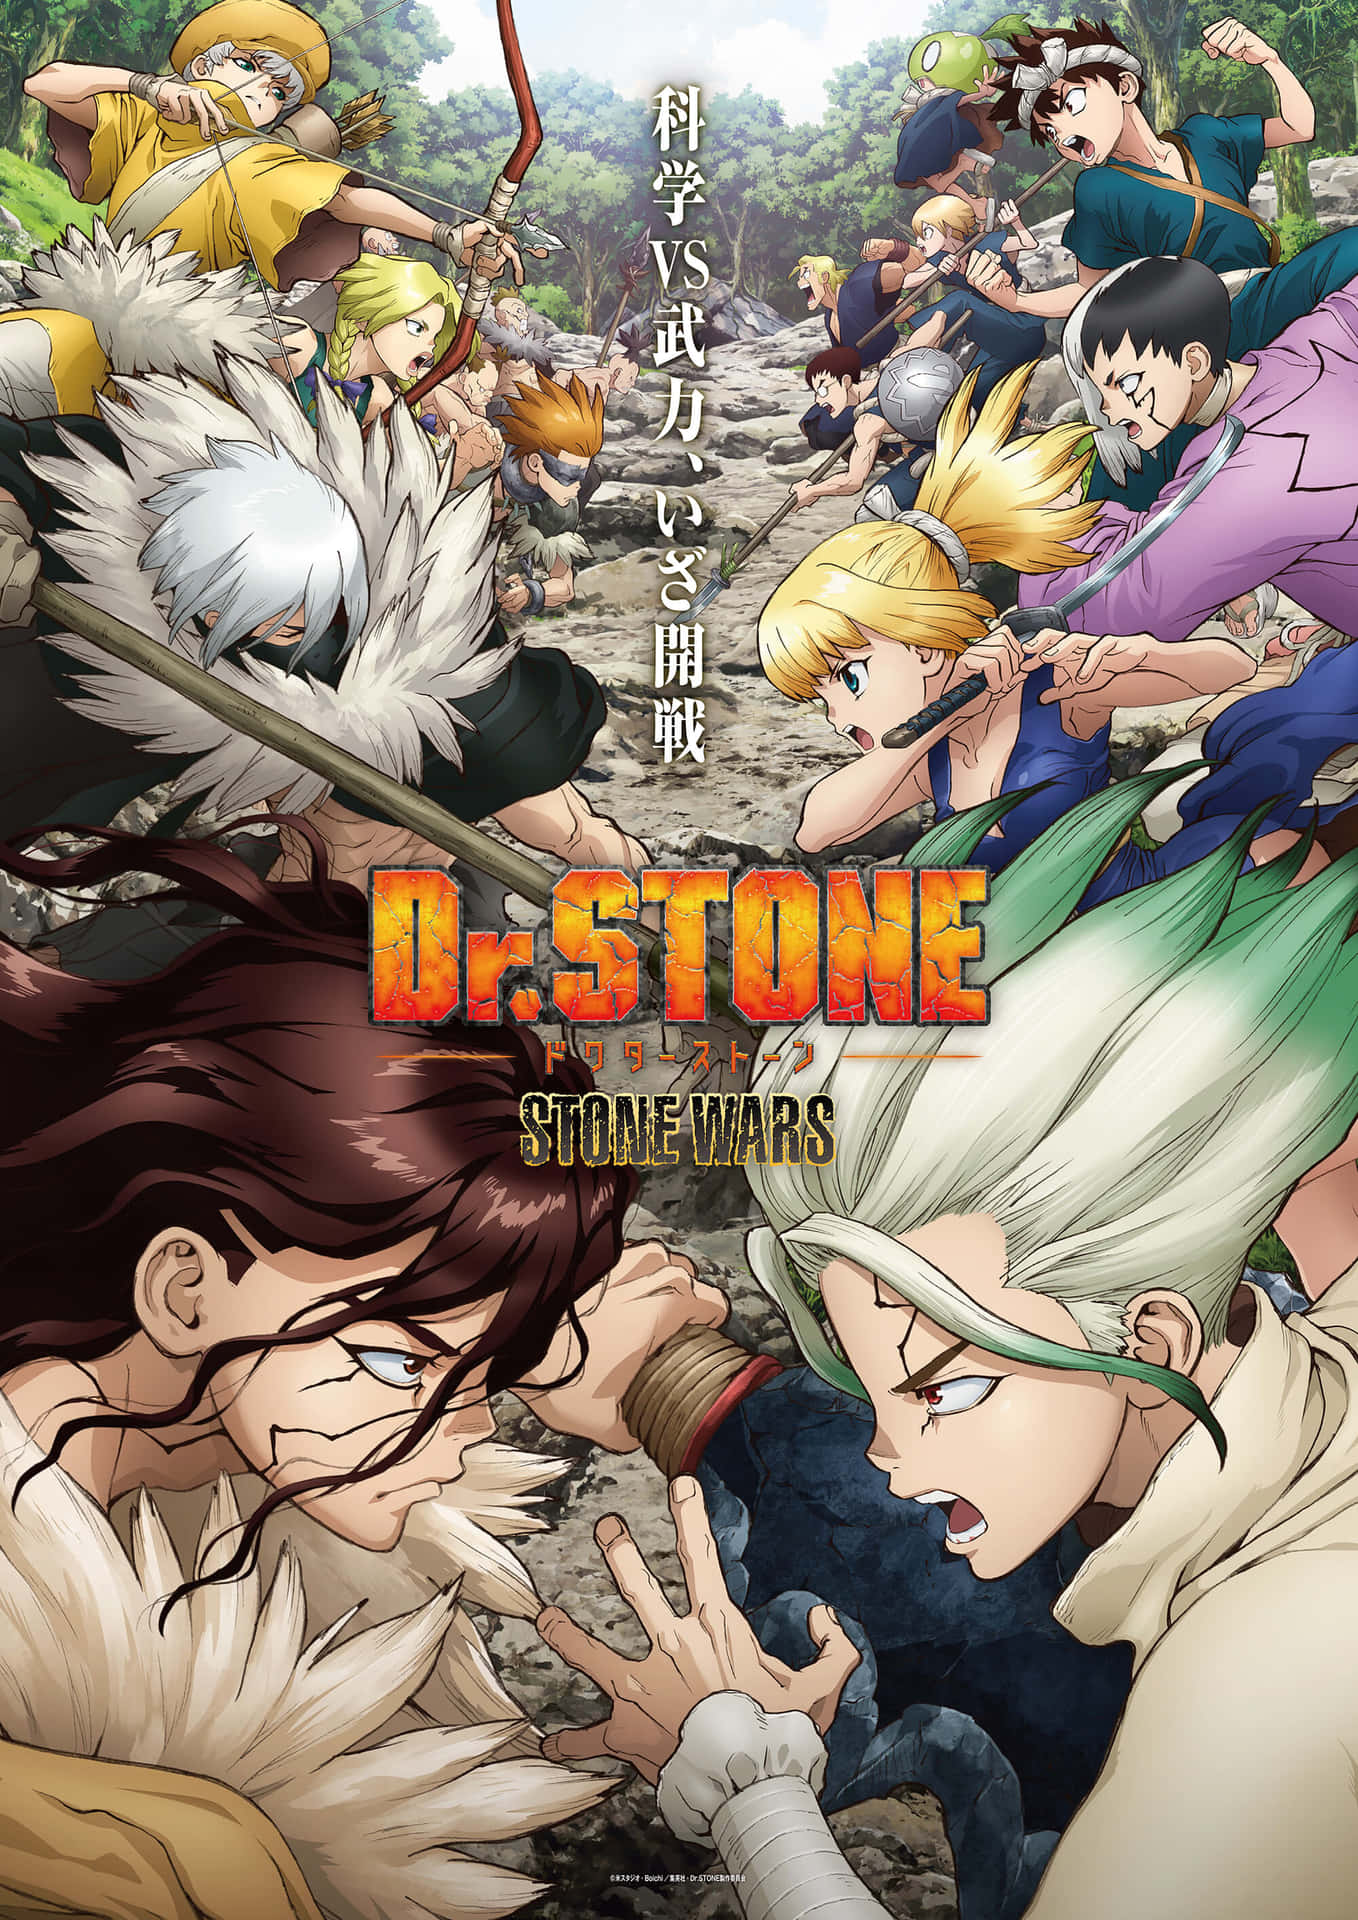 Senku, Chrome and Genzo Seek the Potential of Humanity in Dr Stone